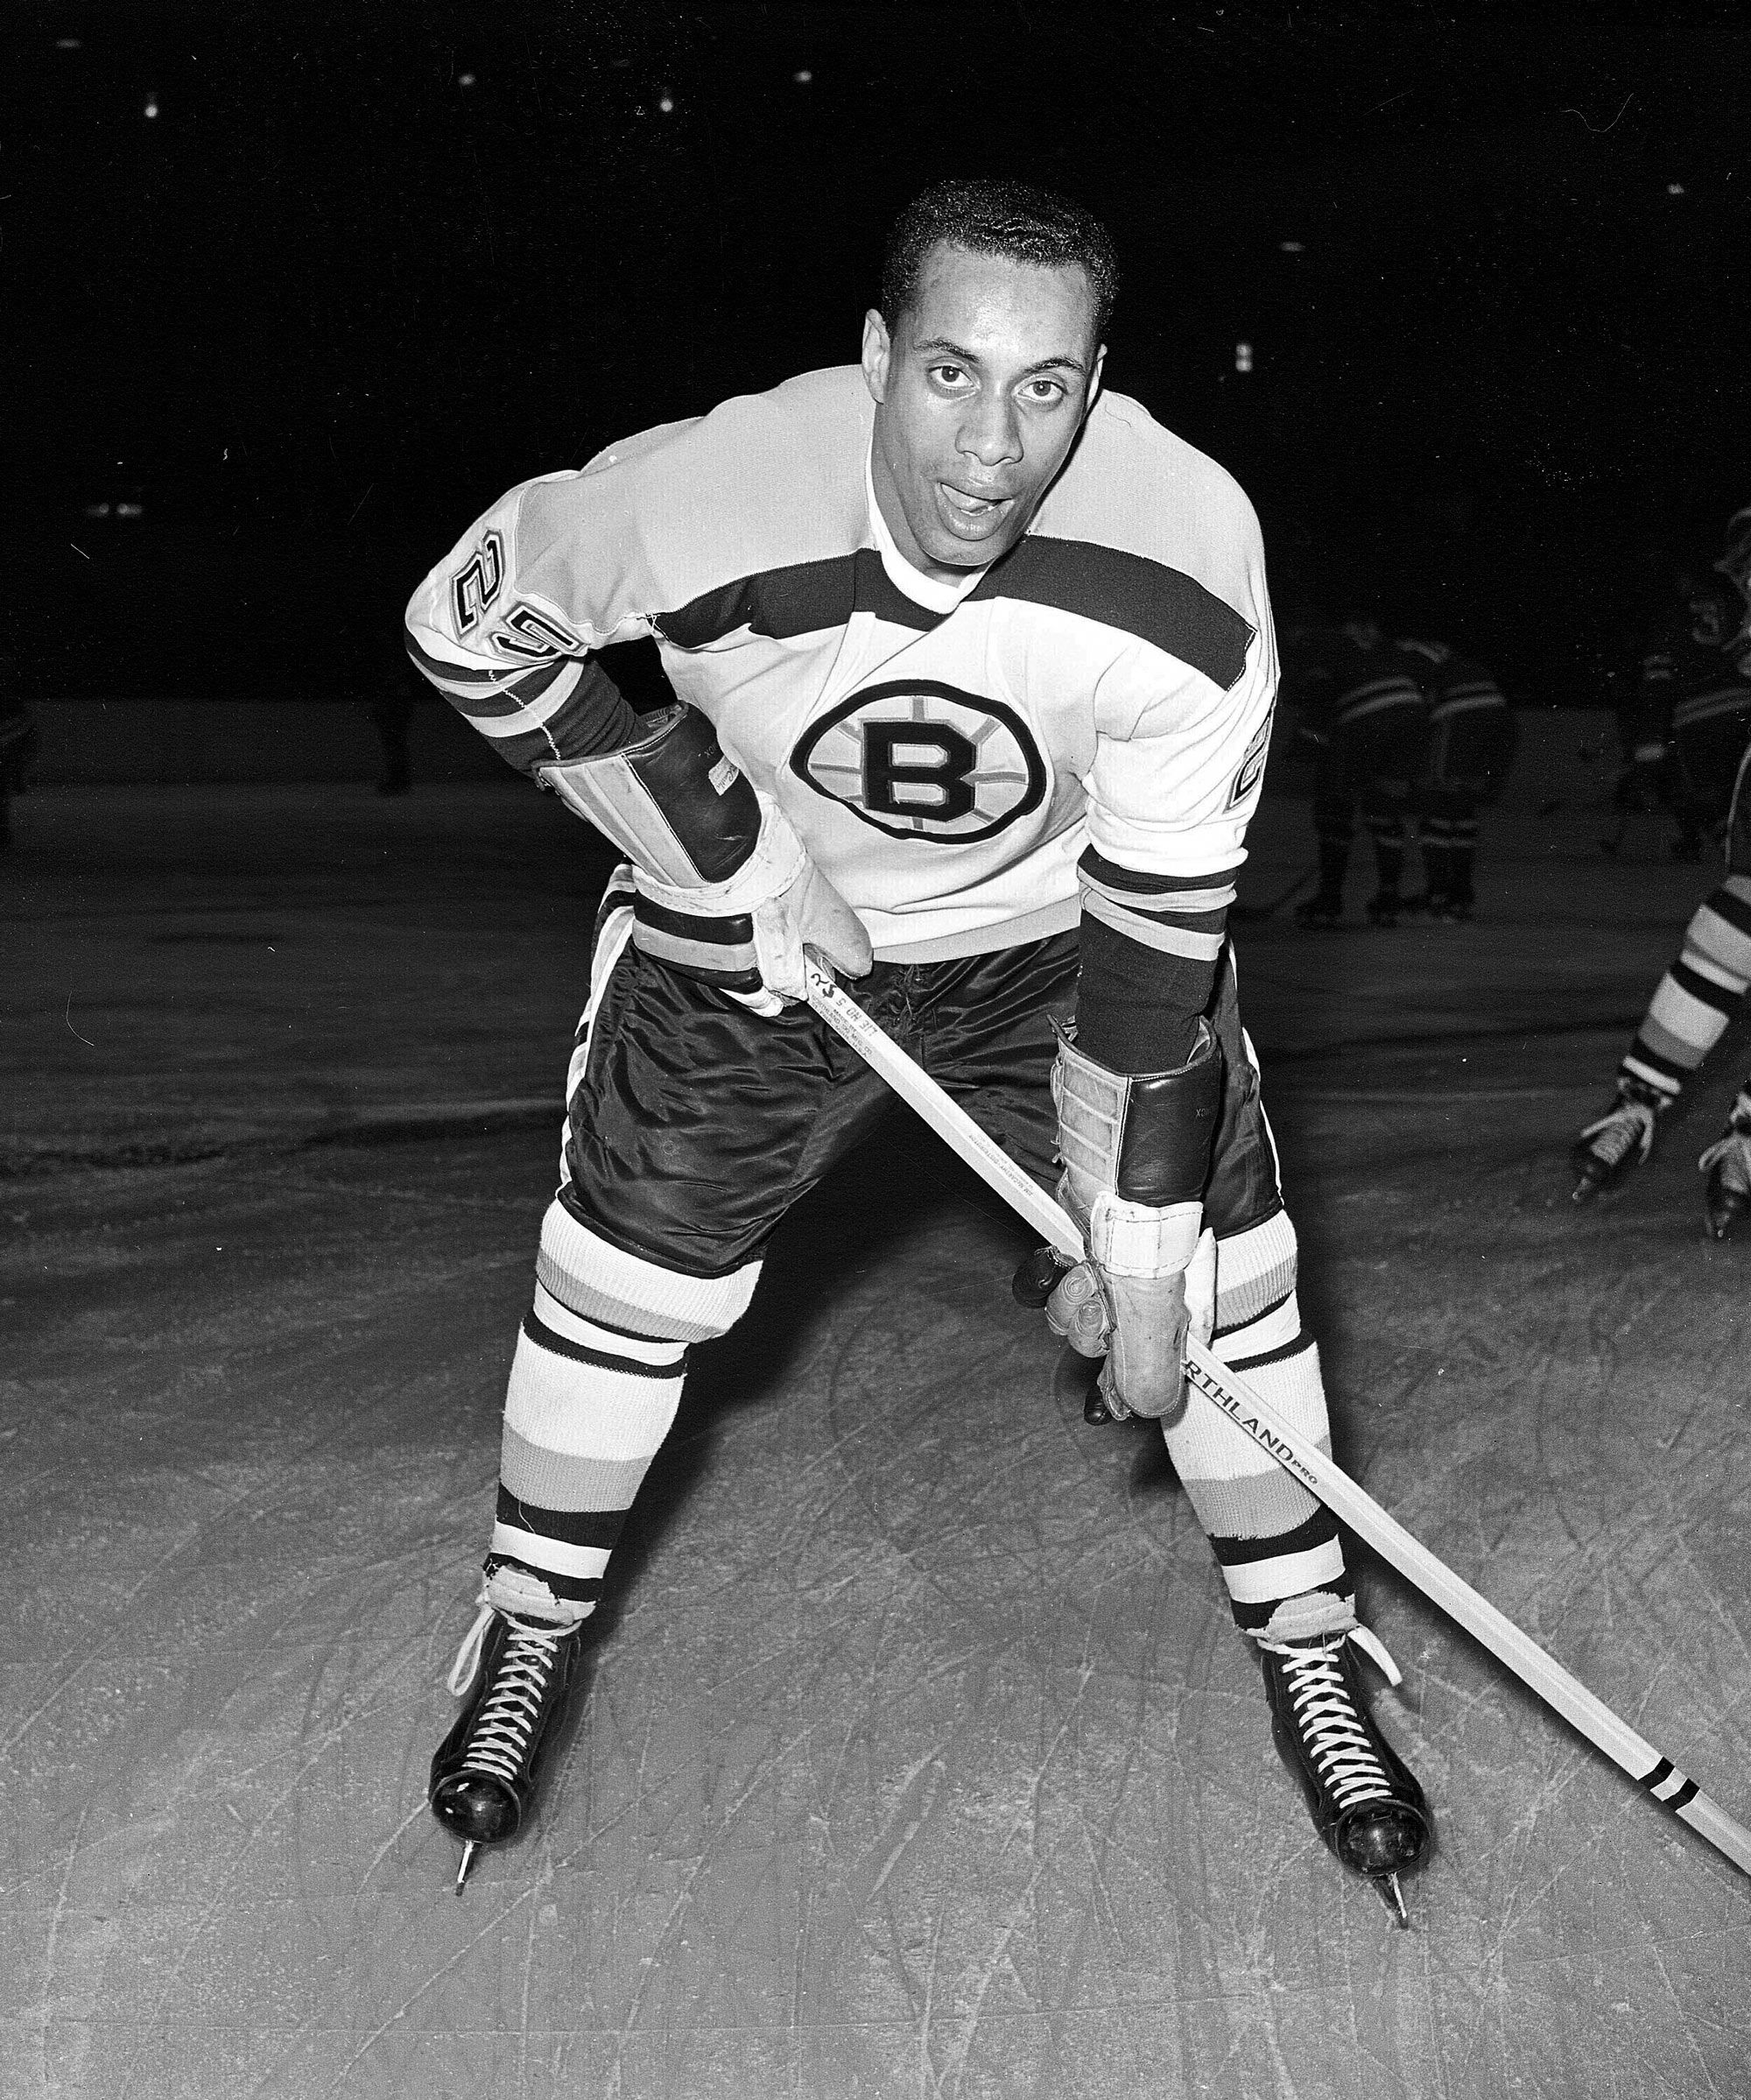 NHL social pioneer Willie O'Ree gets Hall of Fame call / Blowout Buzz